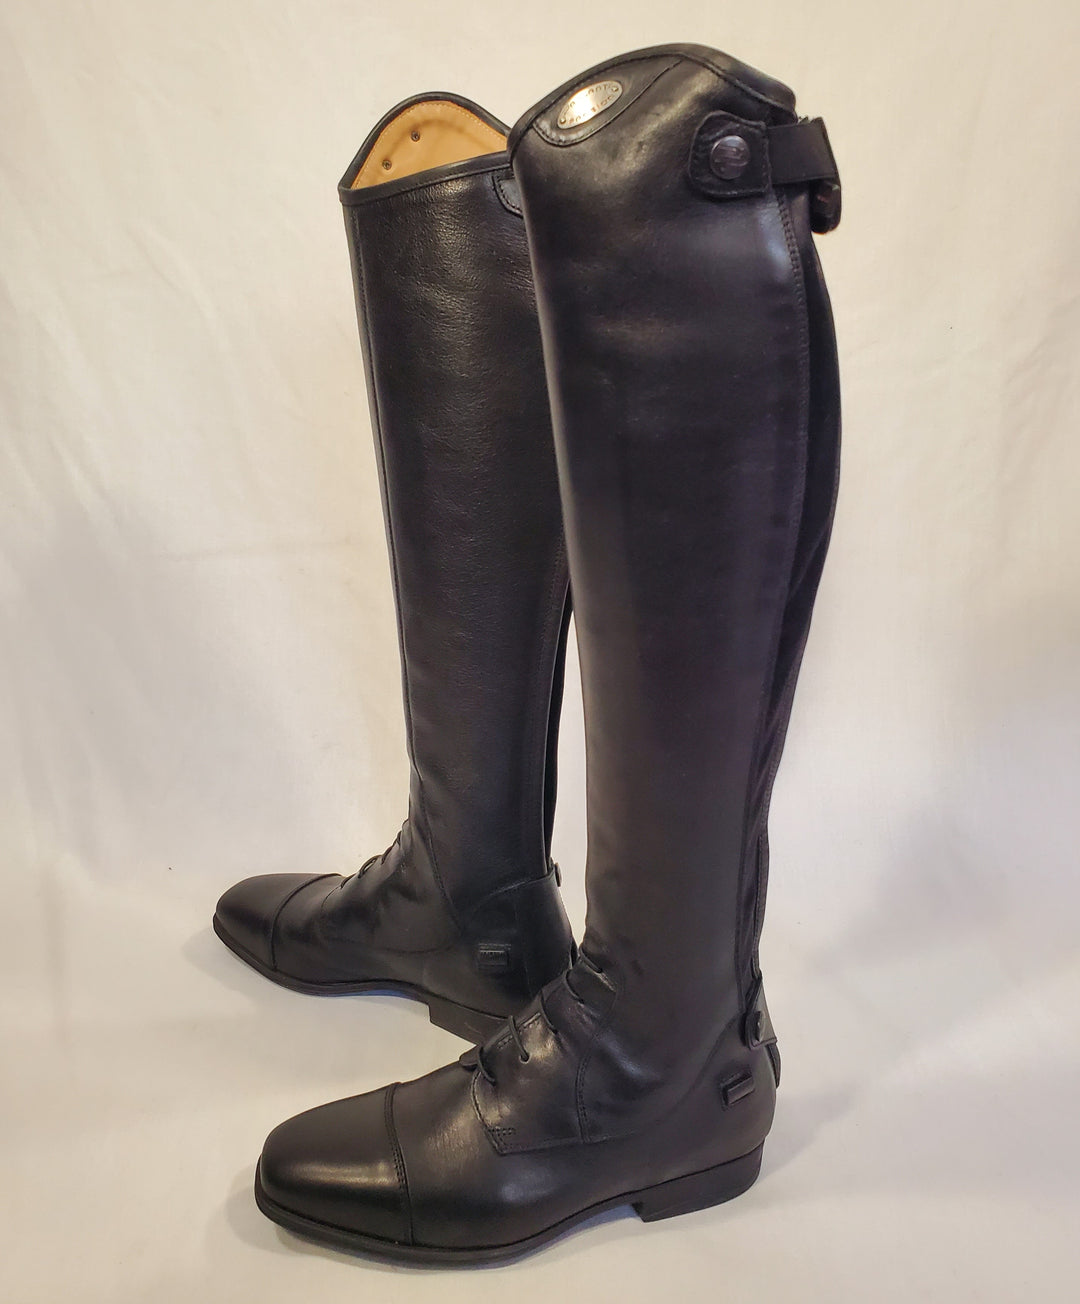 Buy used Ariat Ascent Tall Boots - 38.5 (US 8 Slim Tall) - New